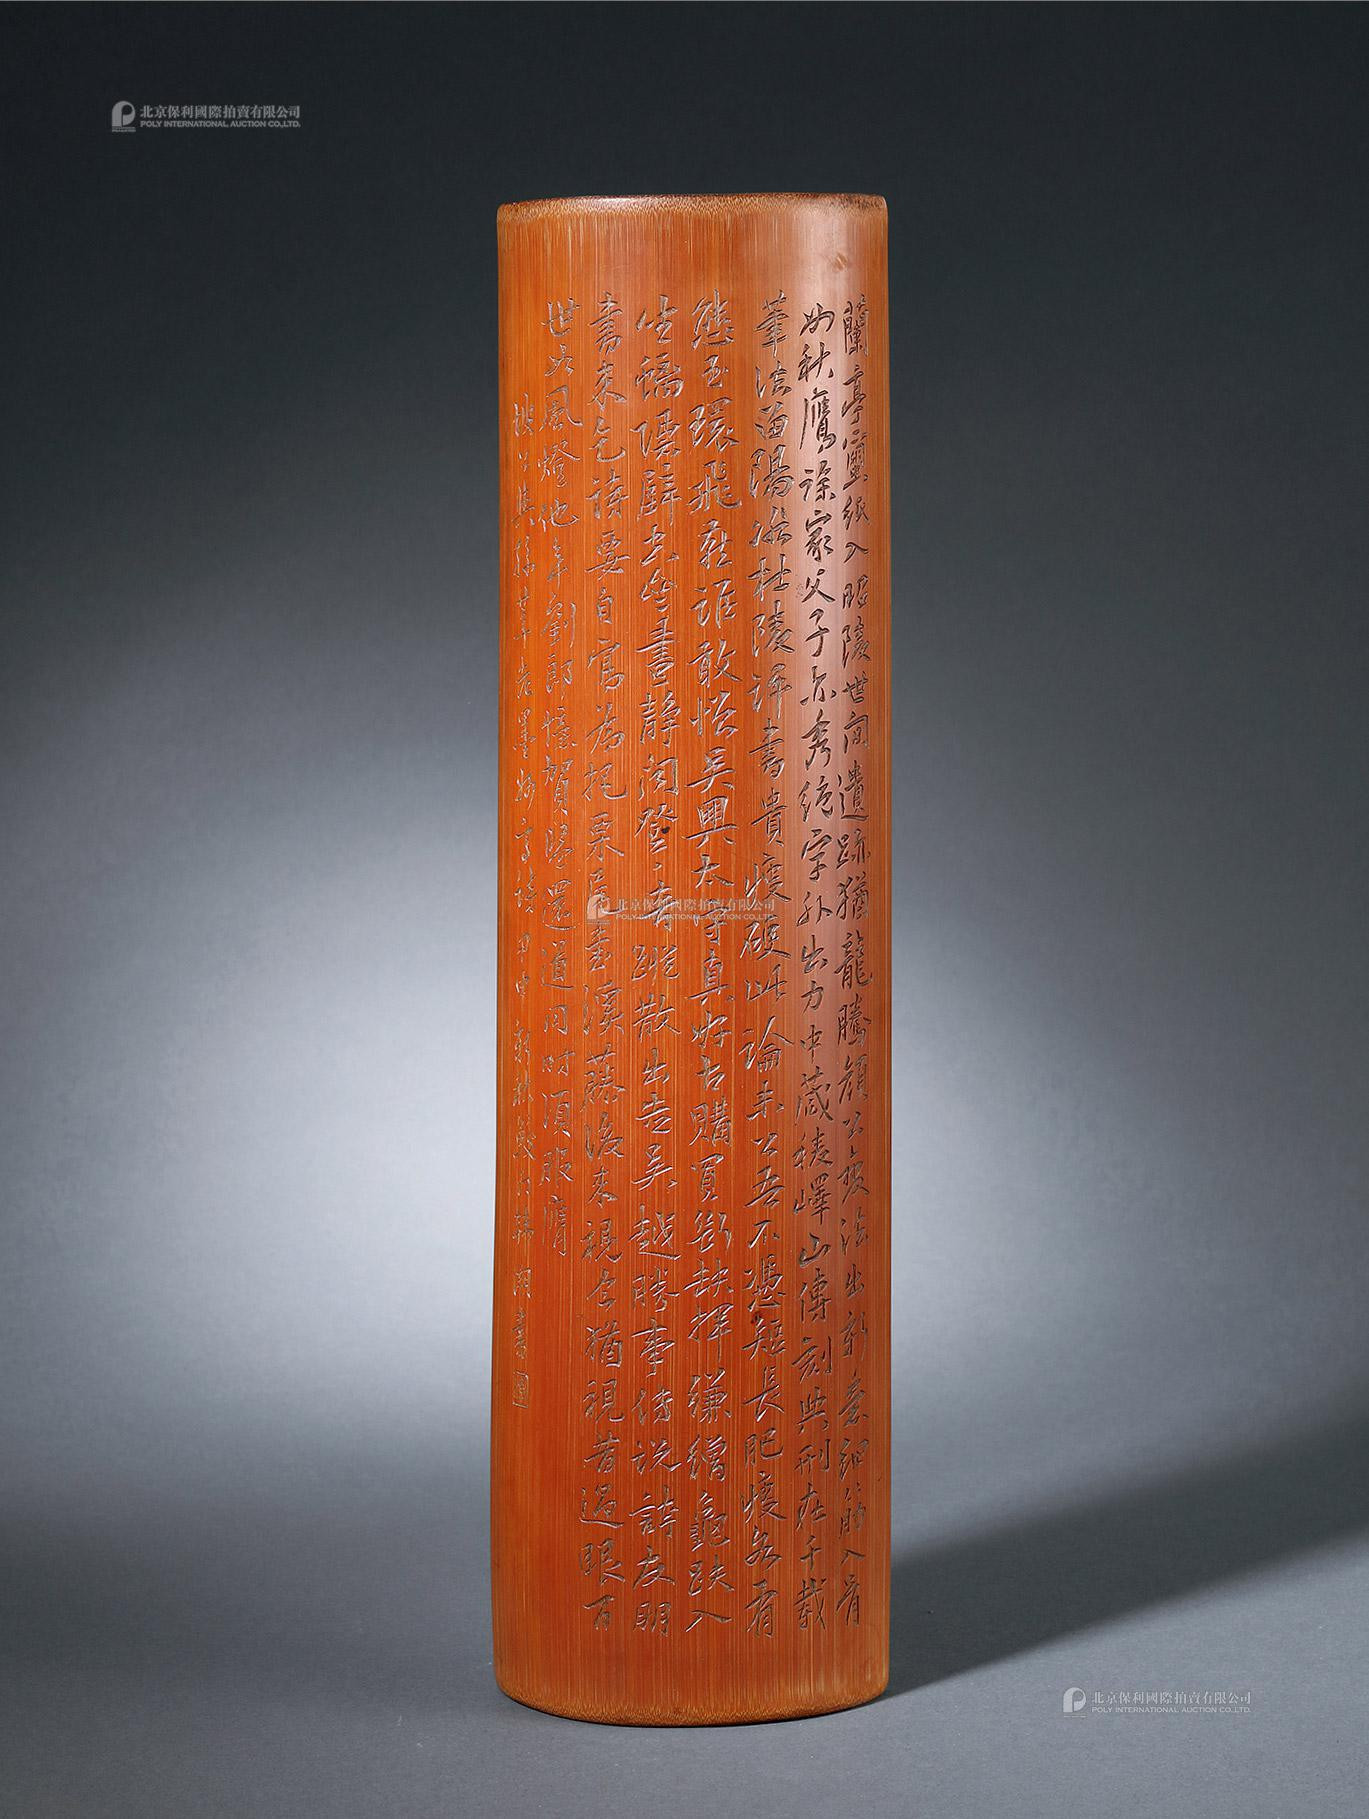 A BAMBOO INSCRIPTED ‘POETRY’ WRISTREST MADE BY HAN JIAOMEN